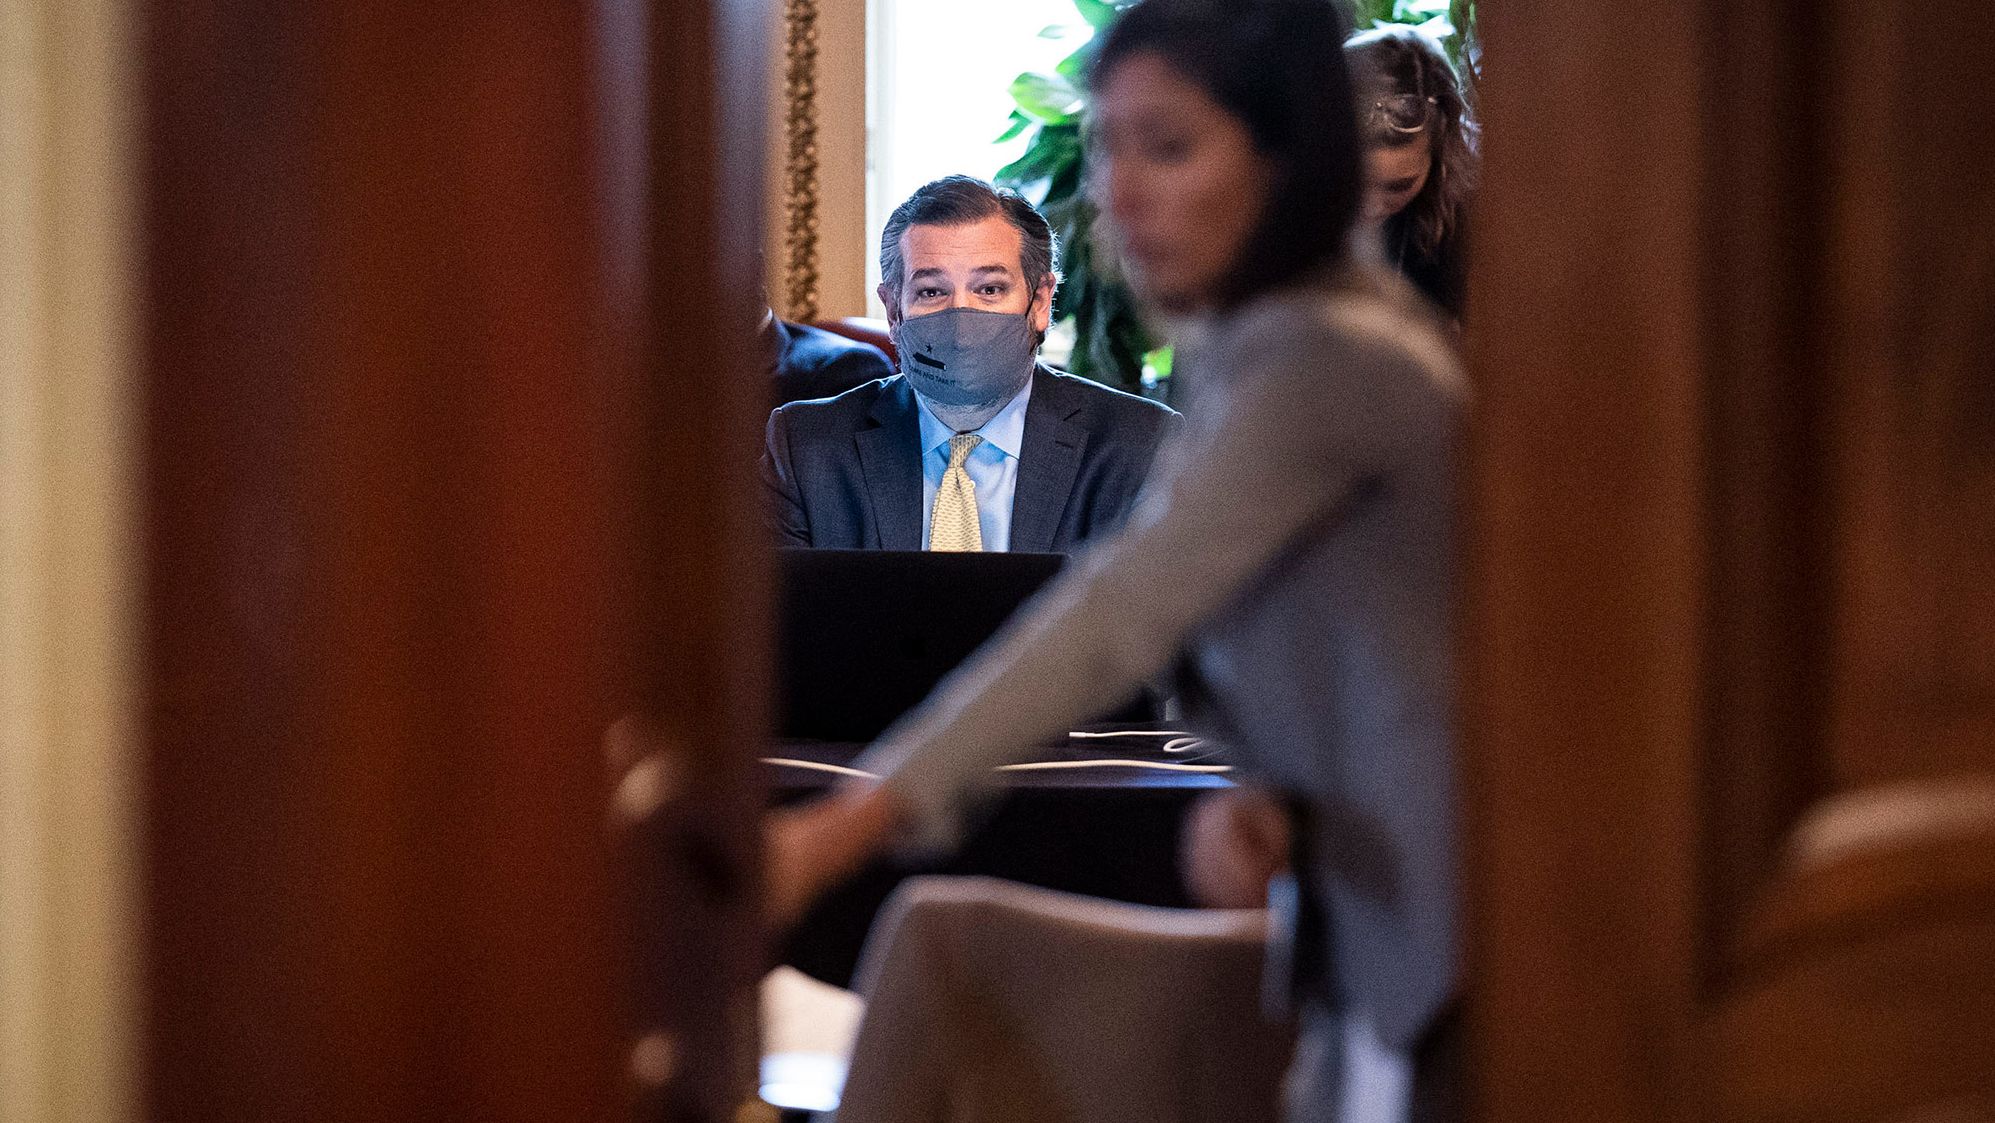 US Sen. Ted Cruz sits in front of a computer as he meets with Donald Trump's lawyers during a break in the trial on Friday. Cruz was part of a group of Republican senators <a href="https://www.cnn.com/politics/live-news/trump-impeachment-trial-02-12-2021/h_f4d65af9a101e1eca296adb937436e76" target="_blank">who had been actively counseling the Trump legal team.</a>